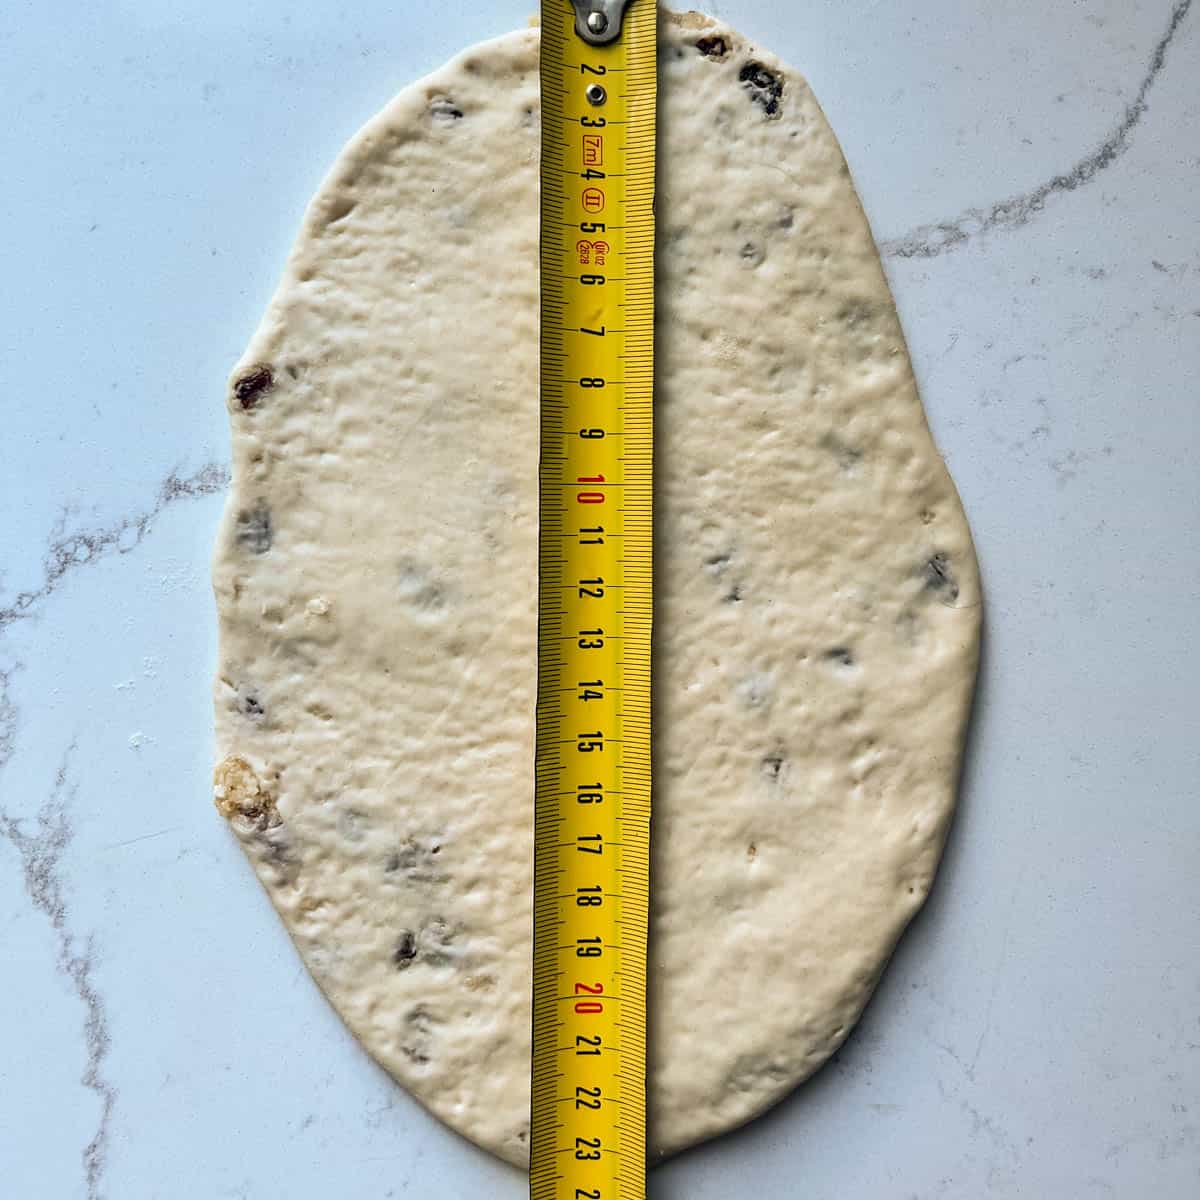 Measuring the length of the naan.